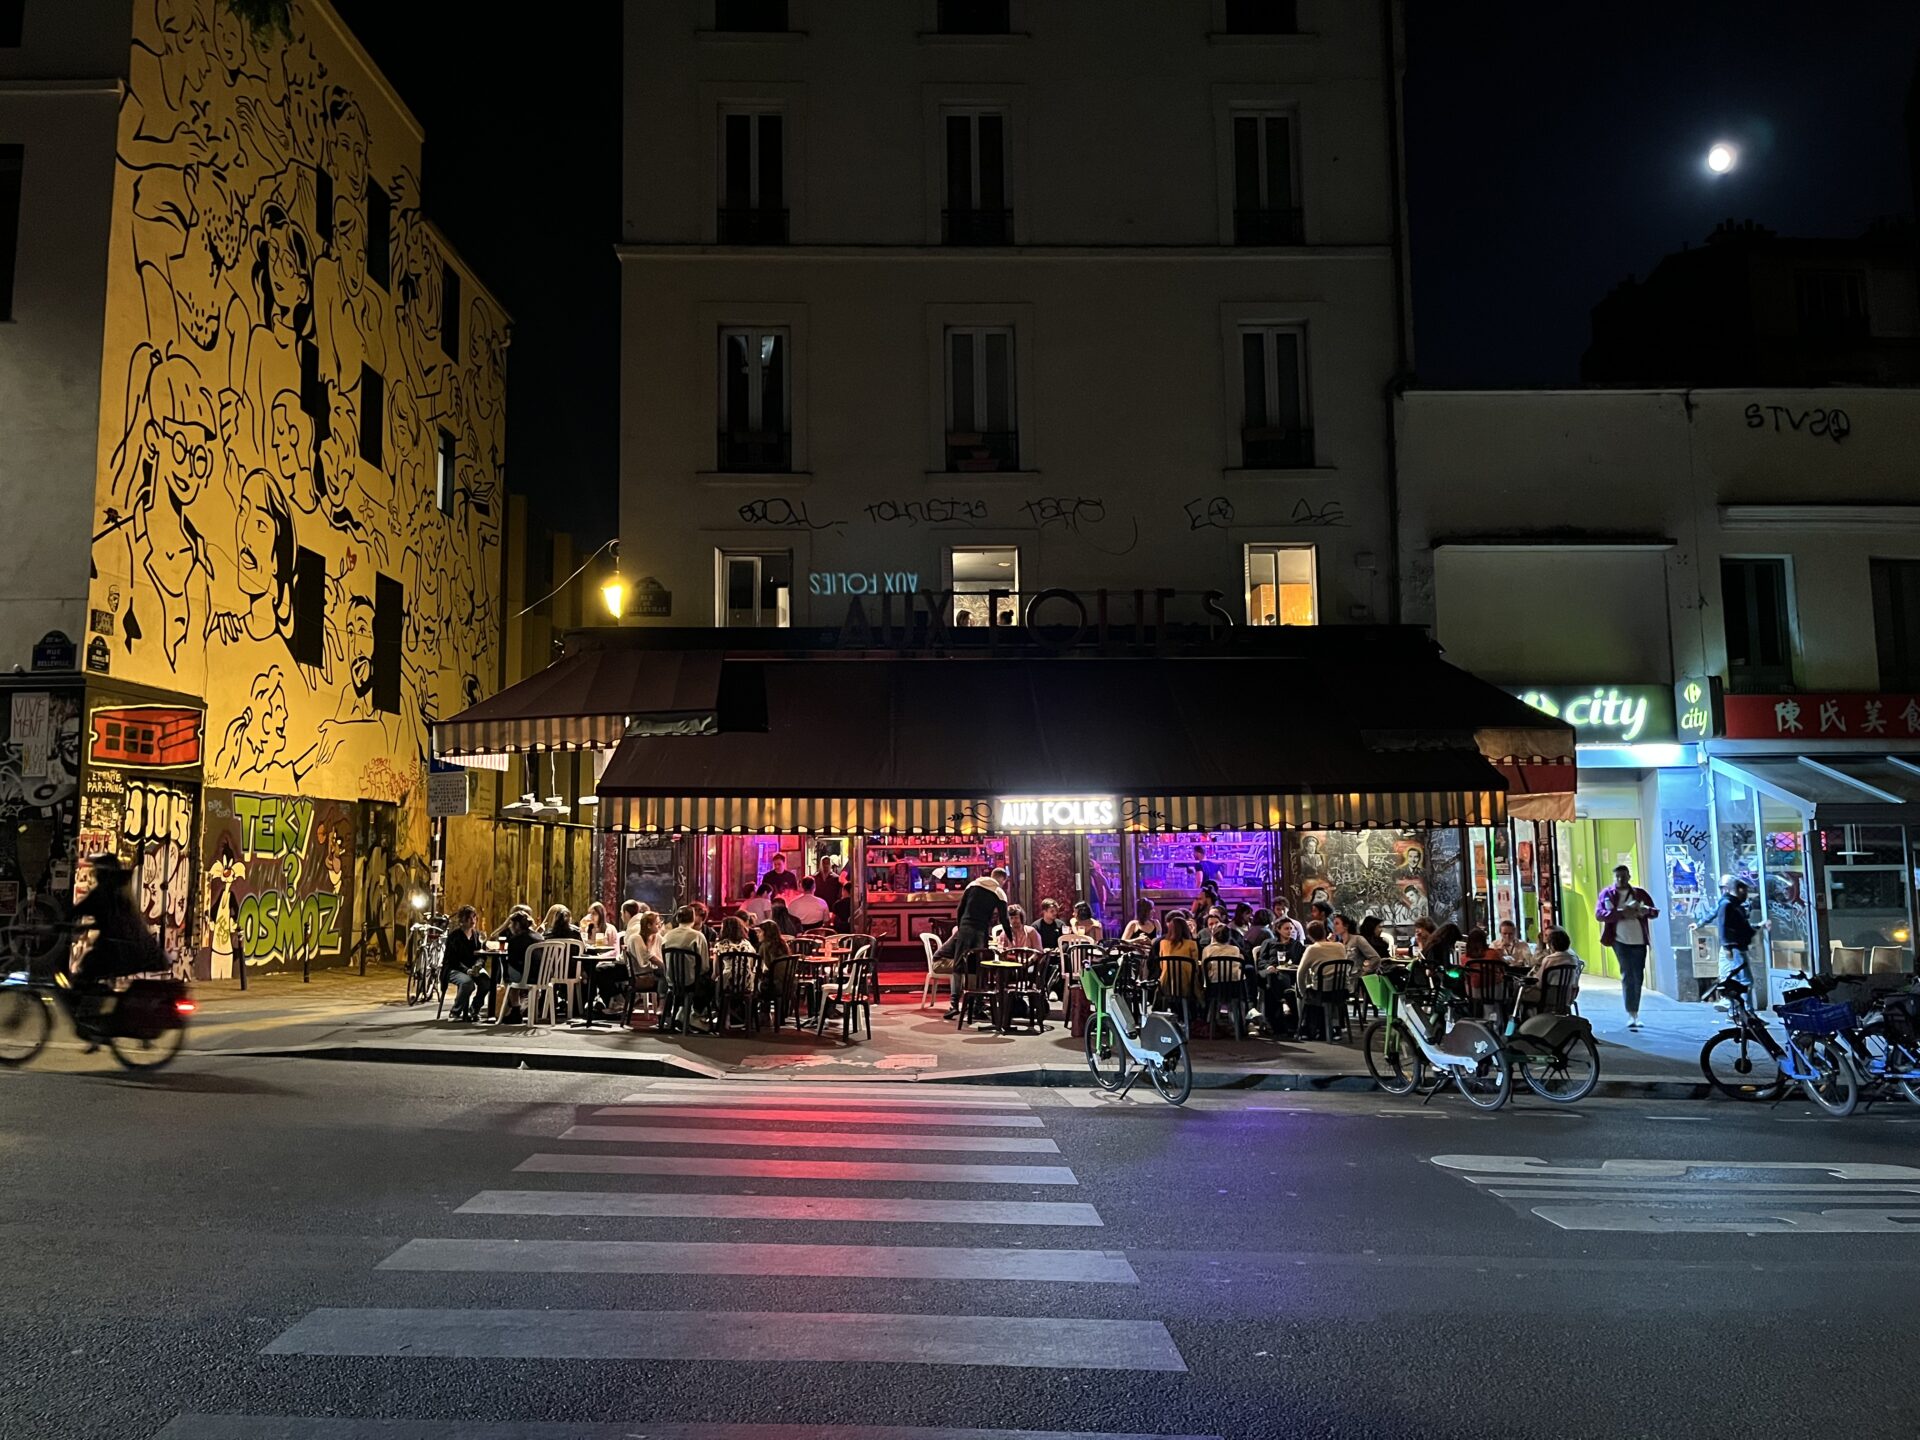 Exterior of Paris bar with crowded terrace